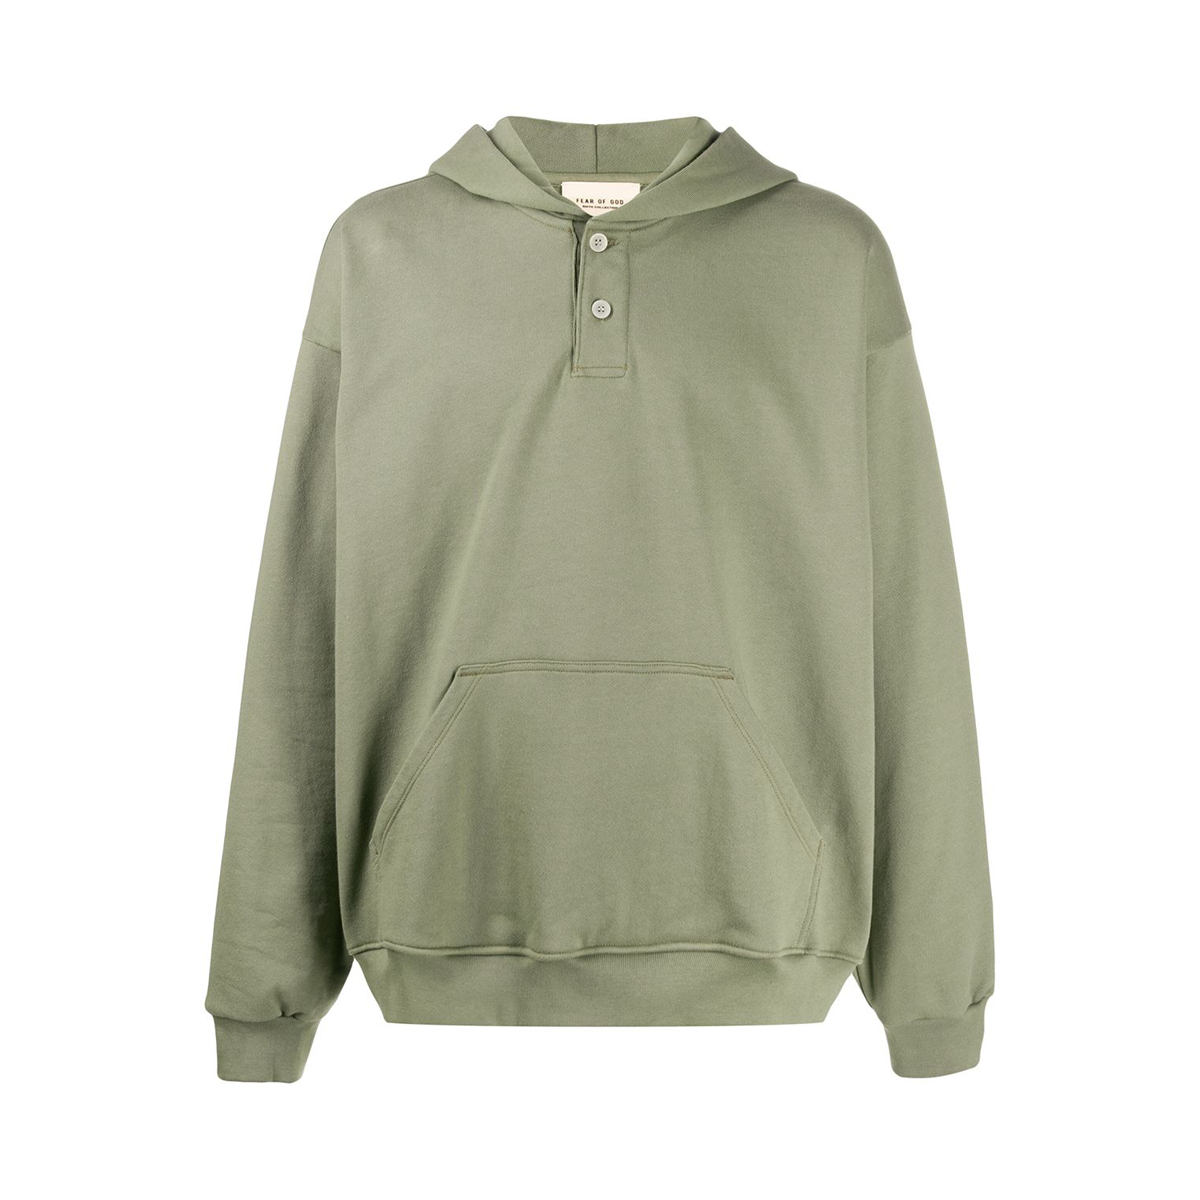 Button hoodie